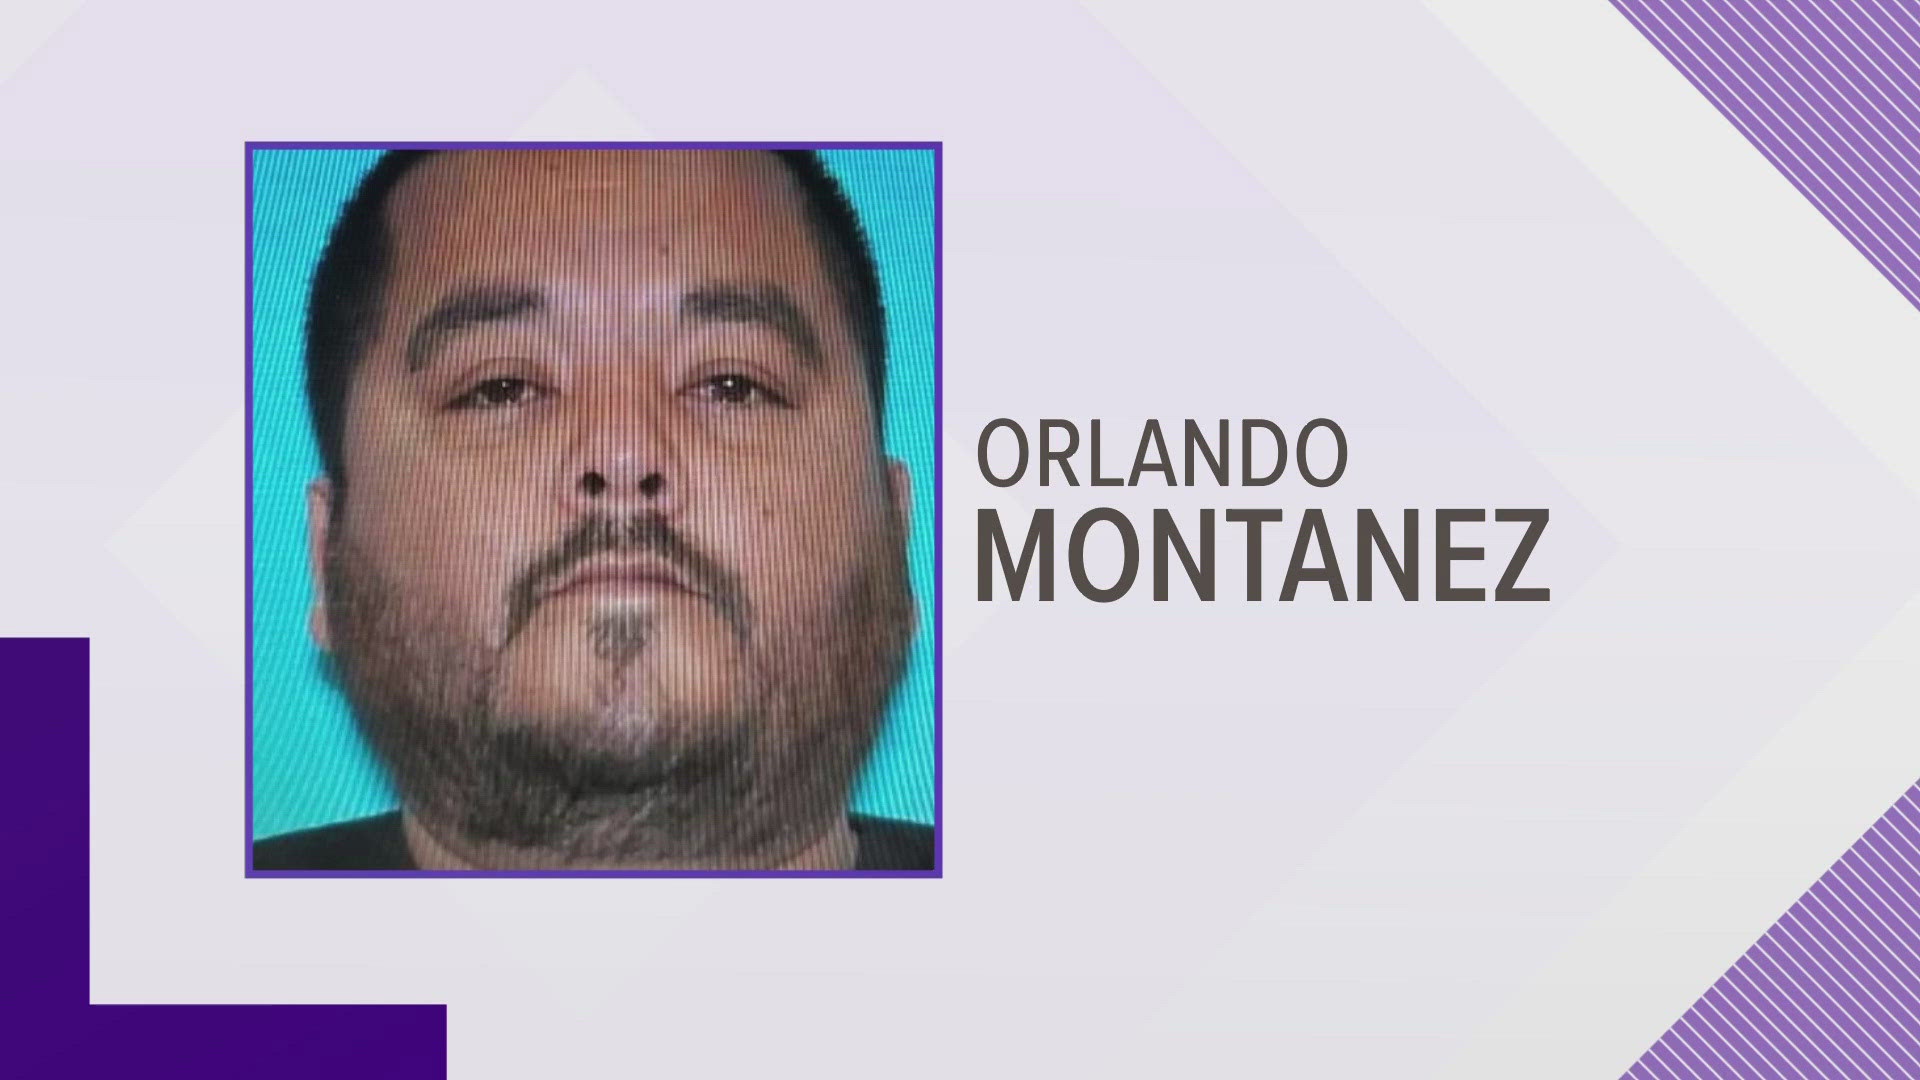 A Big Spring officer was shot after ordering Montanez out of his car. The officer returned fire before taking cover but the suspect then escaped on foot.